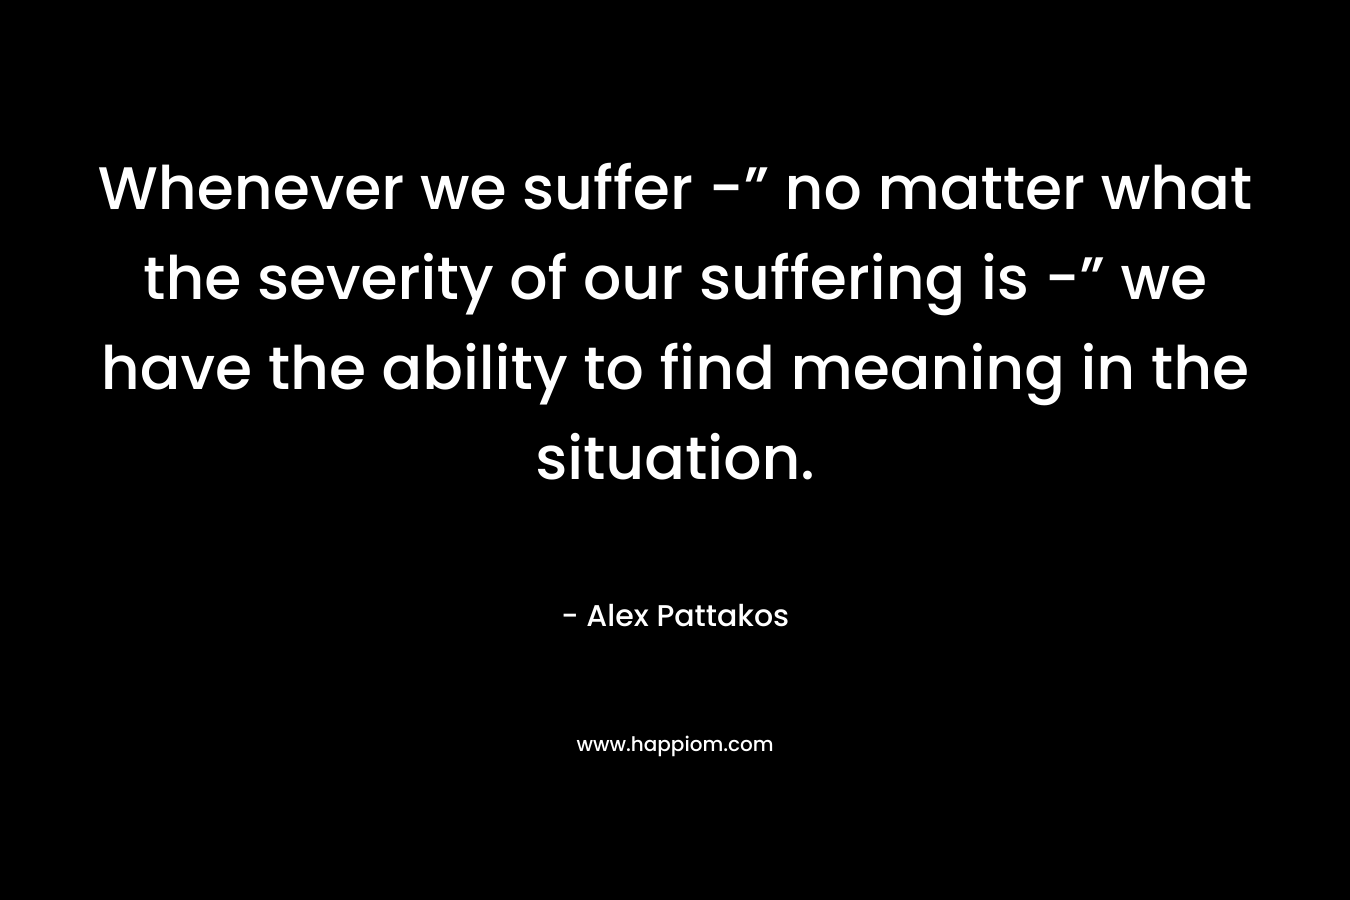 Whenever we suffer -” no matter what the severity of our suffering is -” we have the ability to find meaning in the situation.